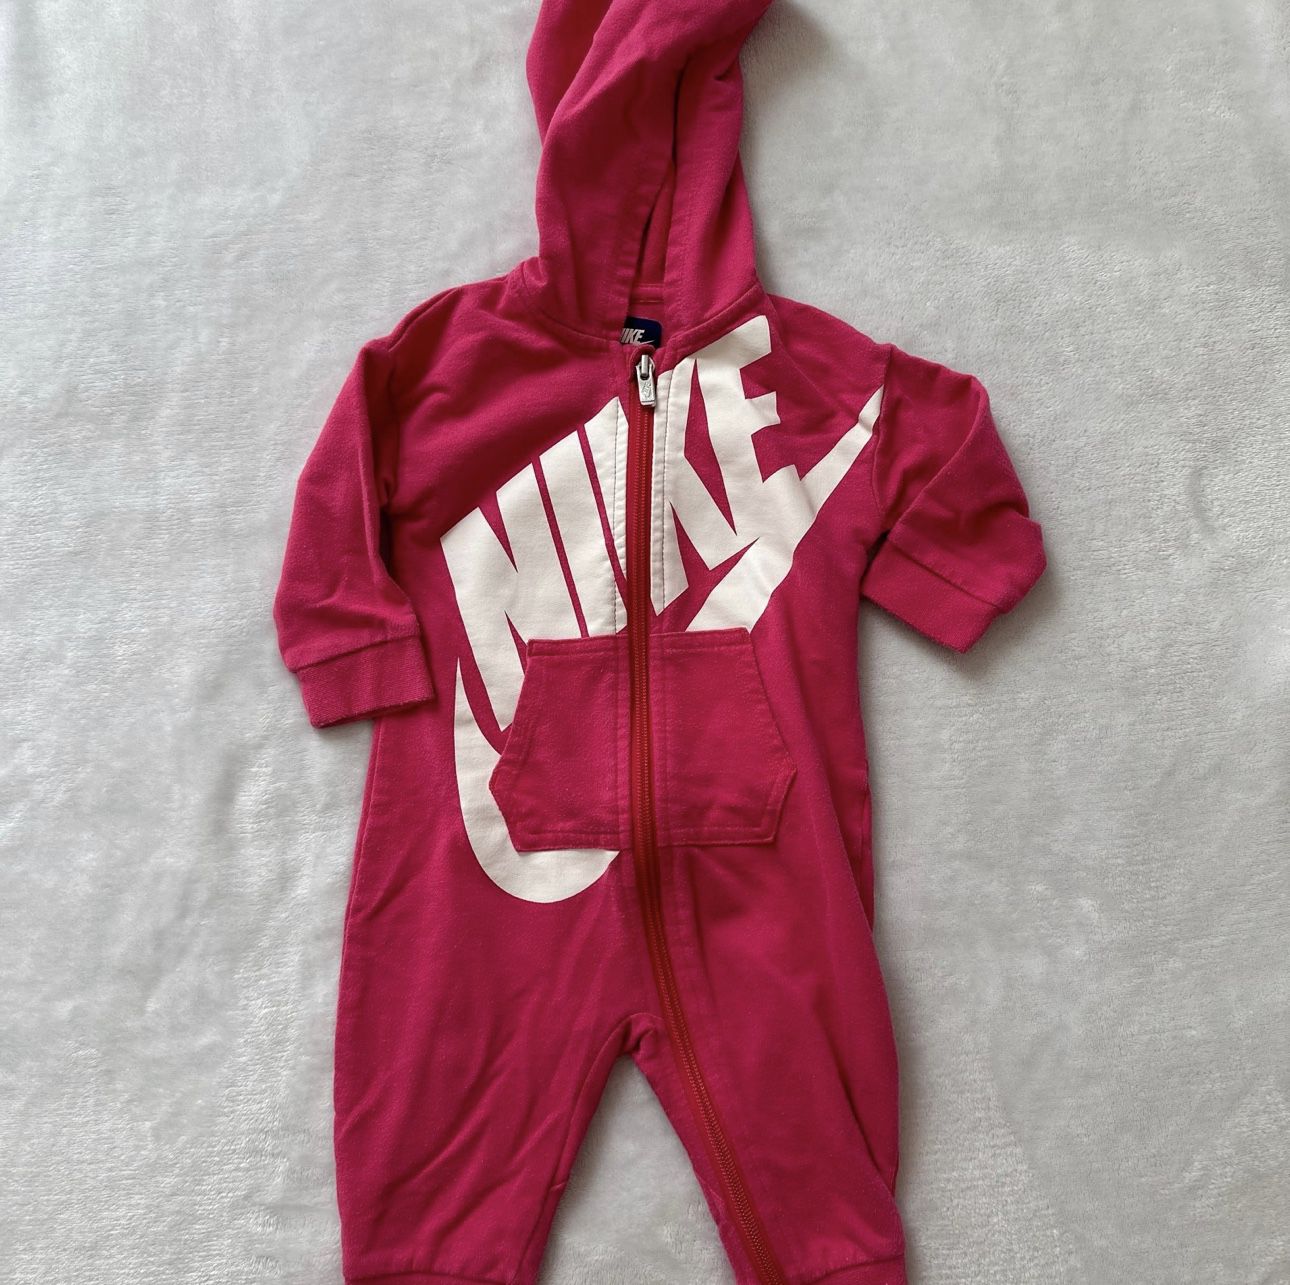 PINK NIKE BABY OUTFIT 6-9 MONTHS